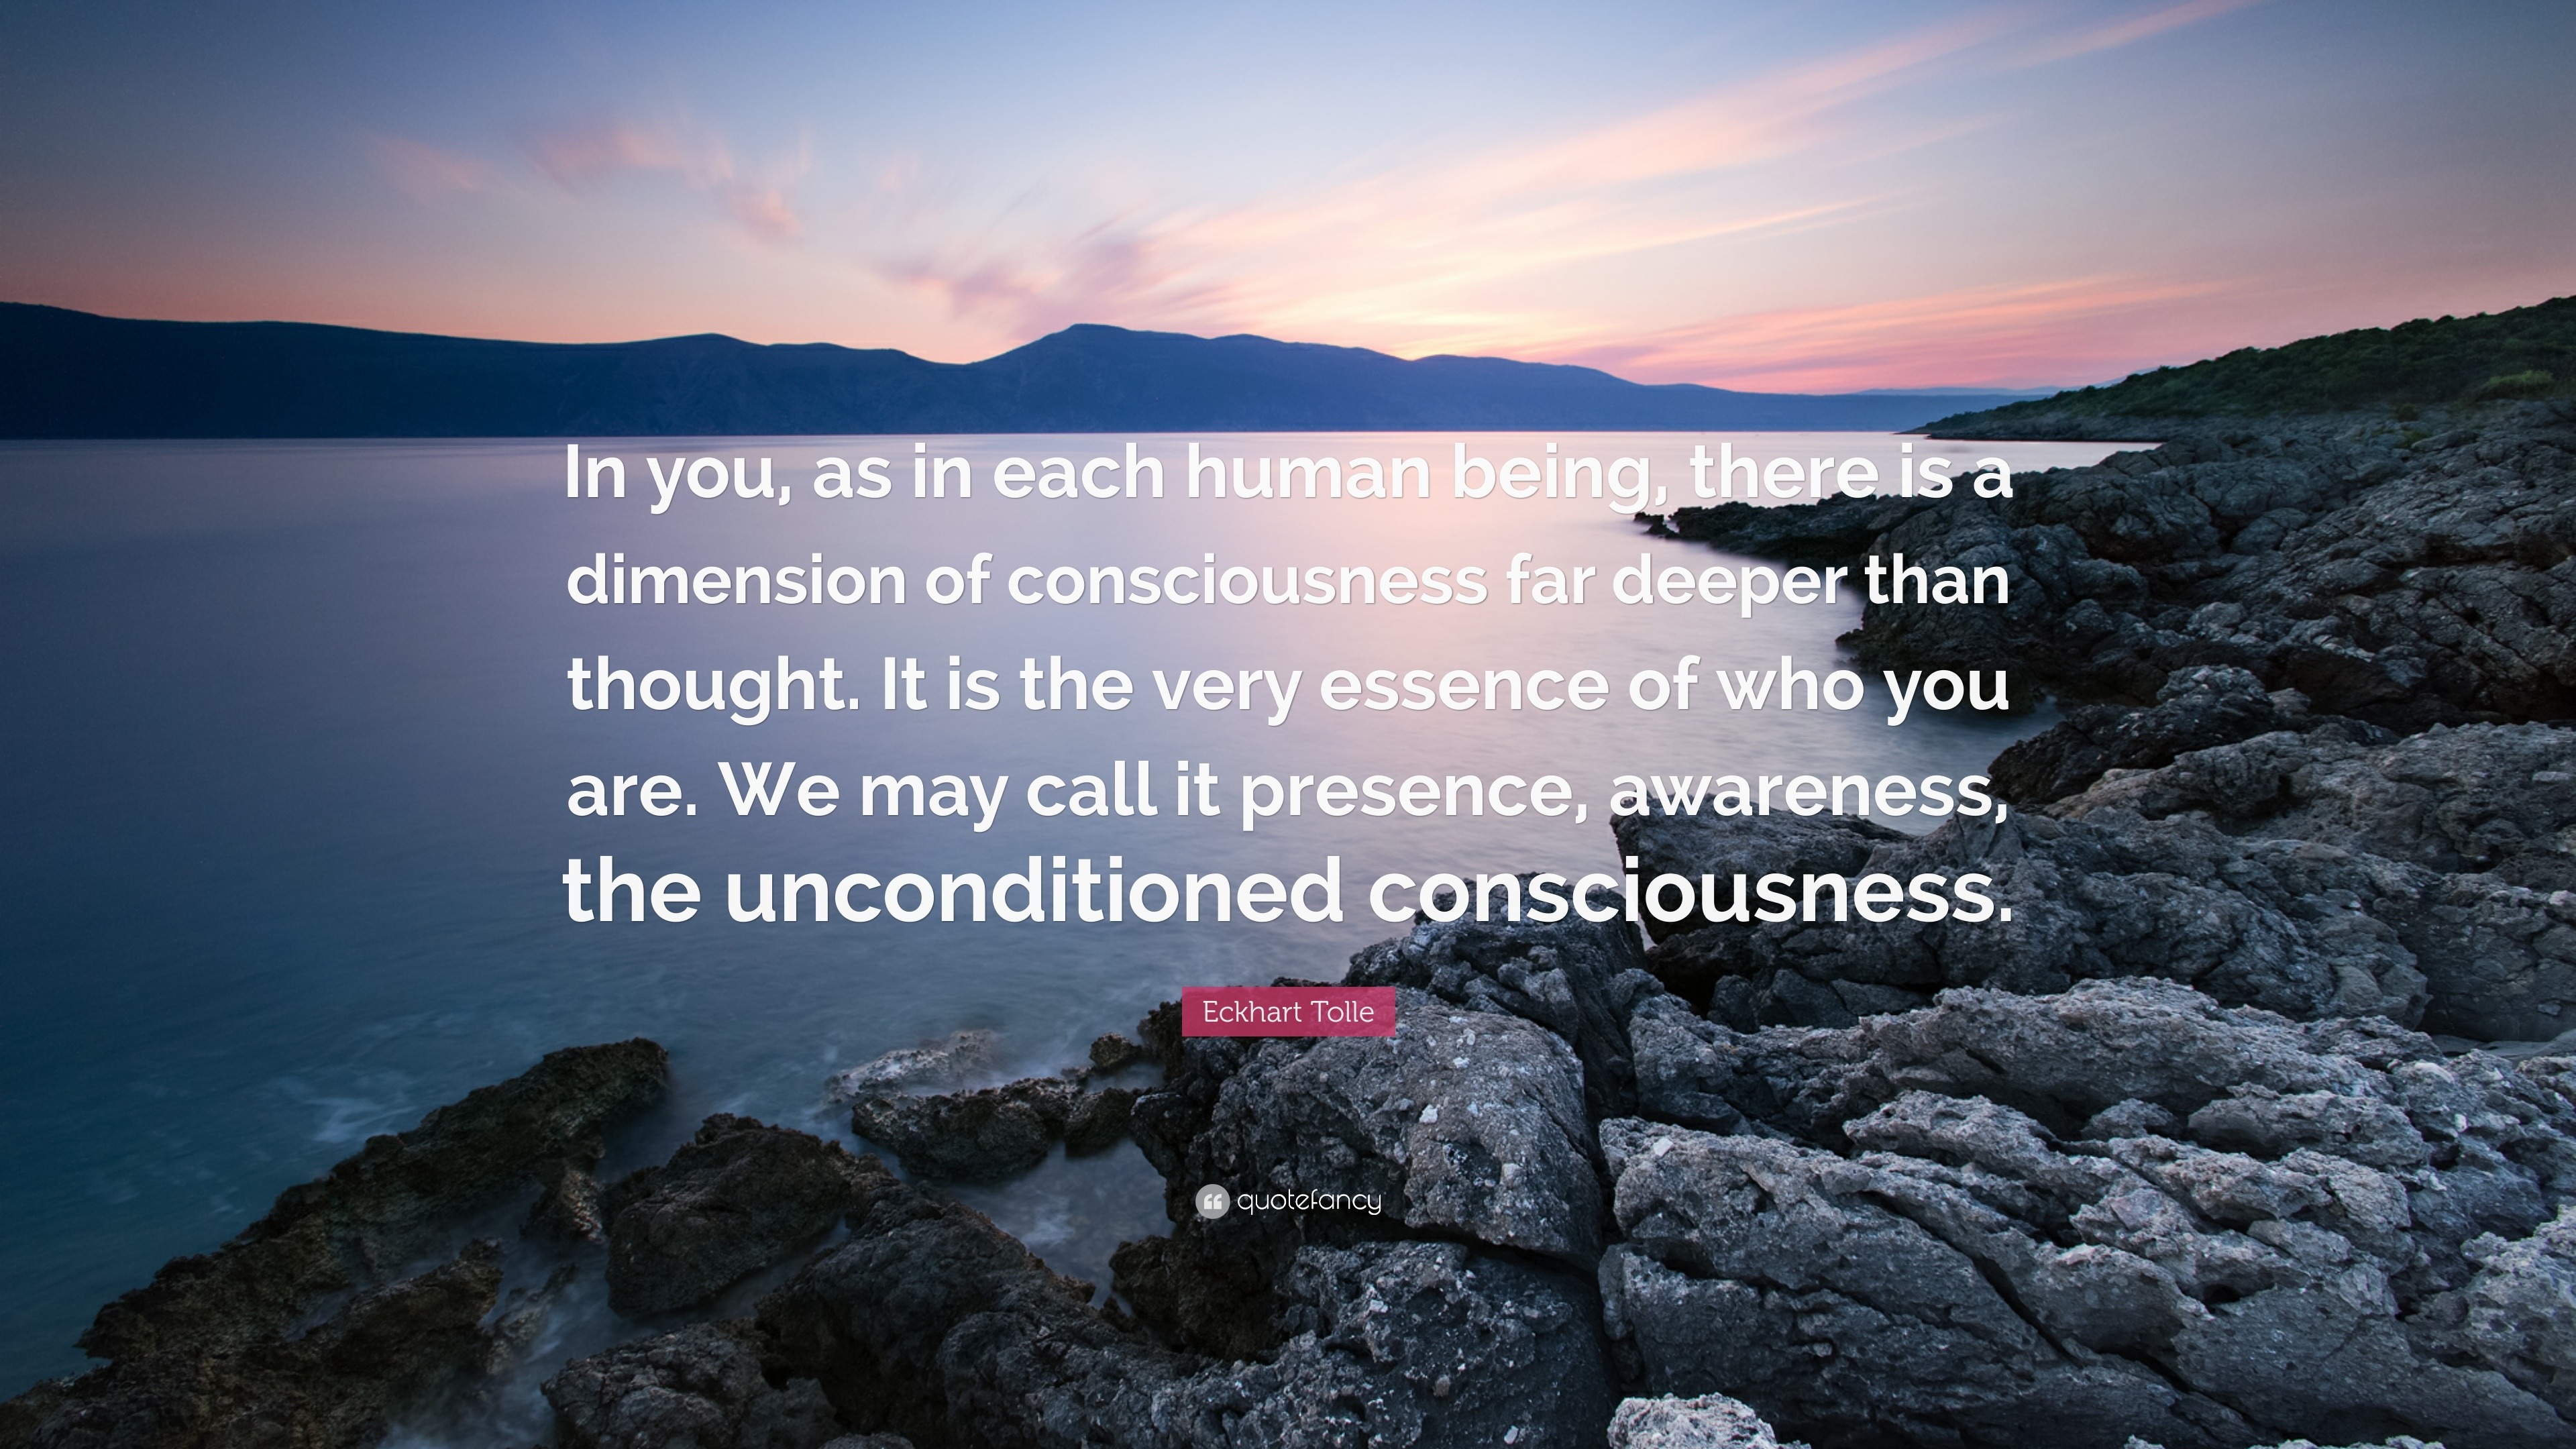 Eckhart Tolle Quote: “In you, as in each human being, there is a ...